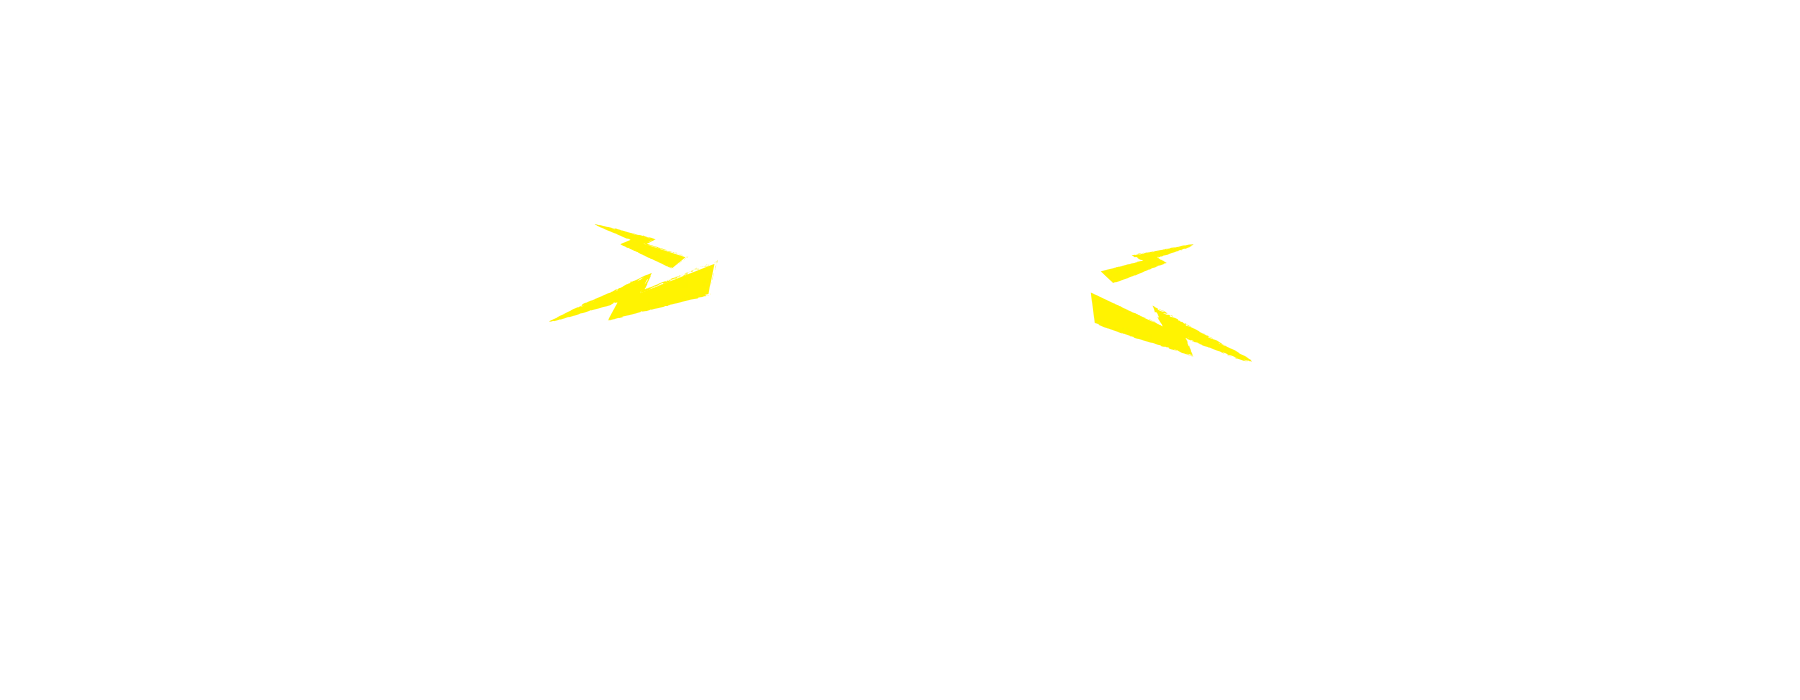 Embrace Your Punch logo